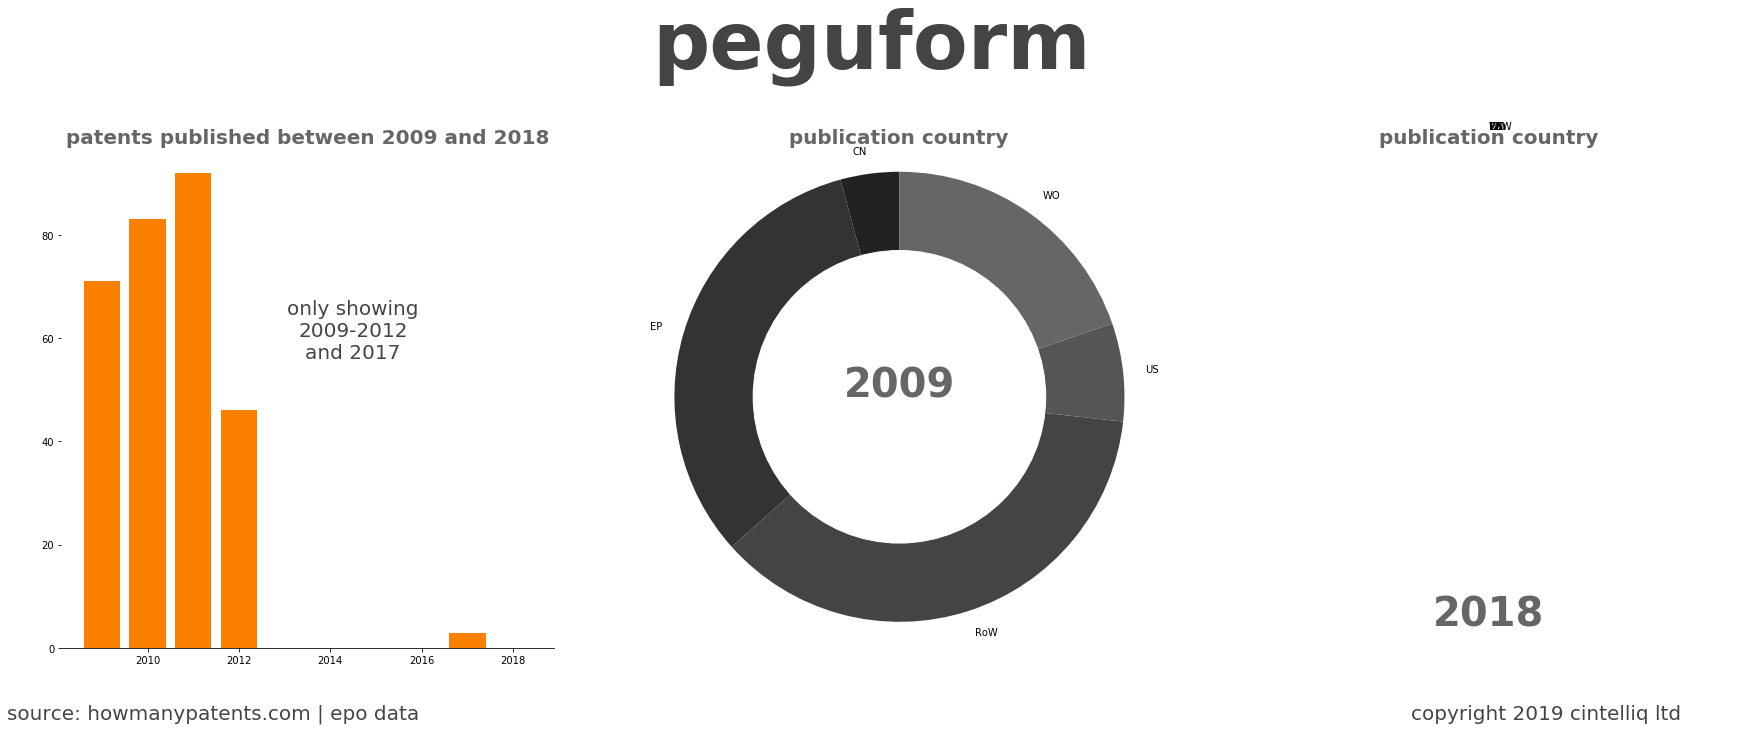 summary of patents for Peguform